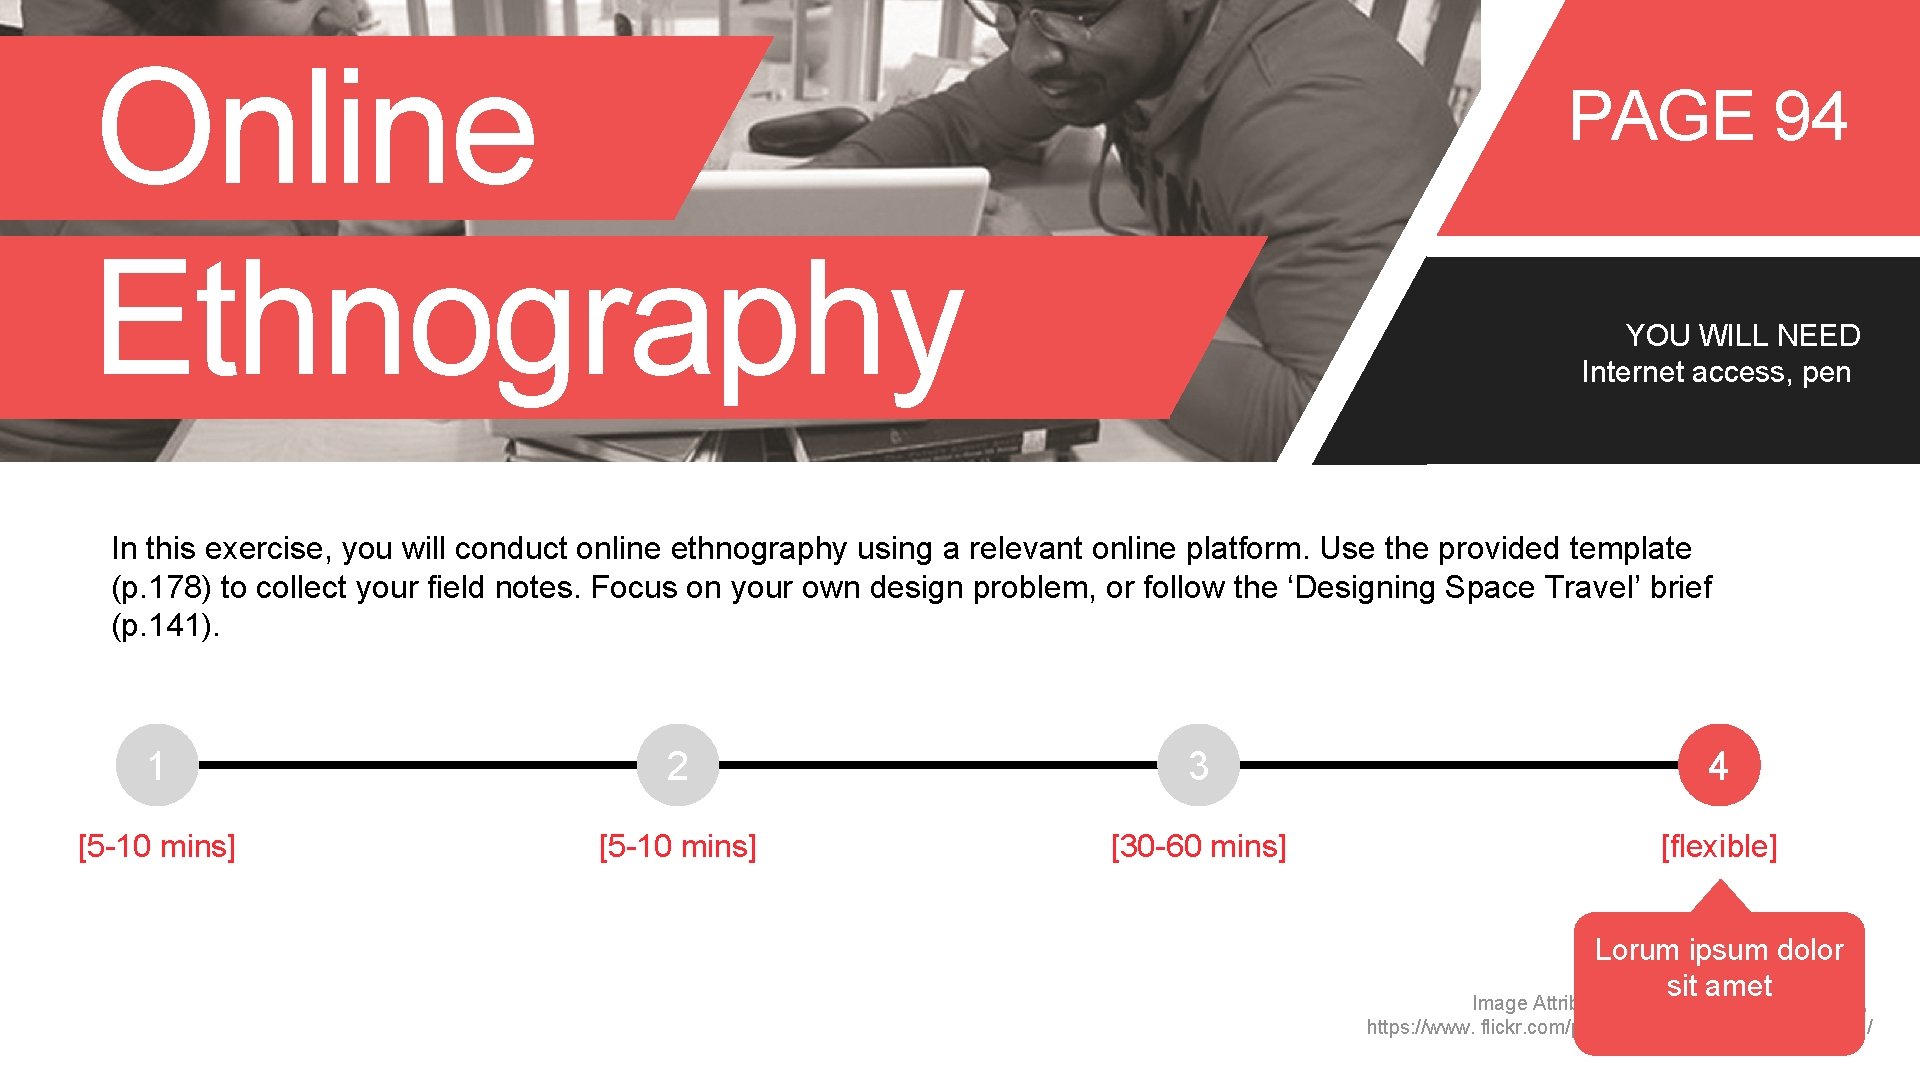 Online Ethnography PAGE 94 YOU WILL NEED Internet access, pen In this exercise, you